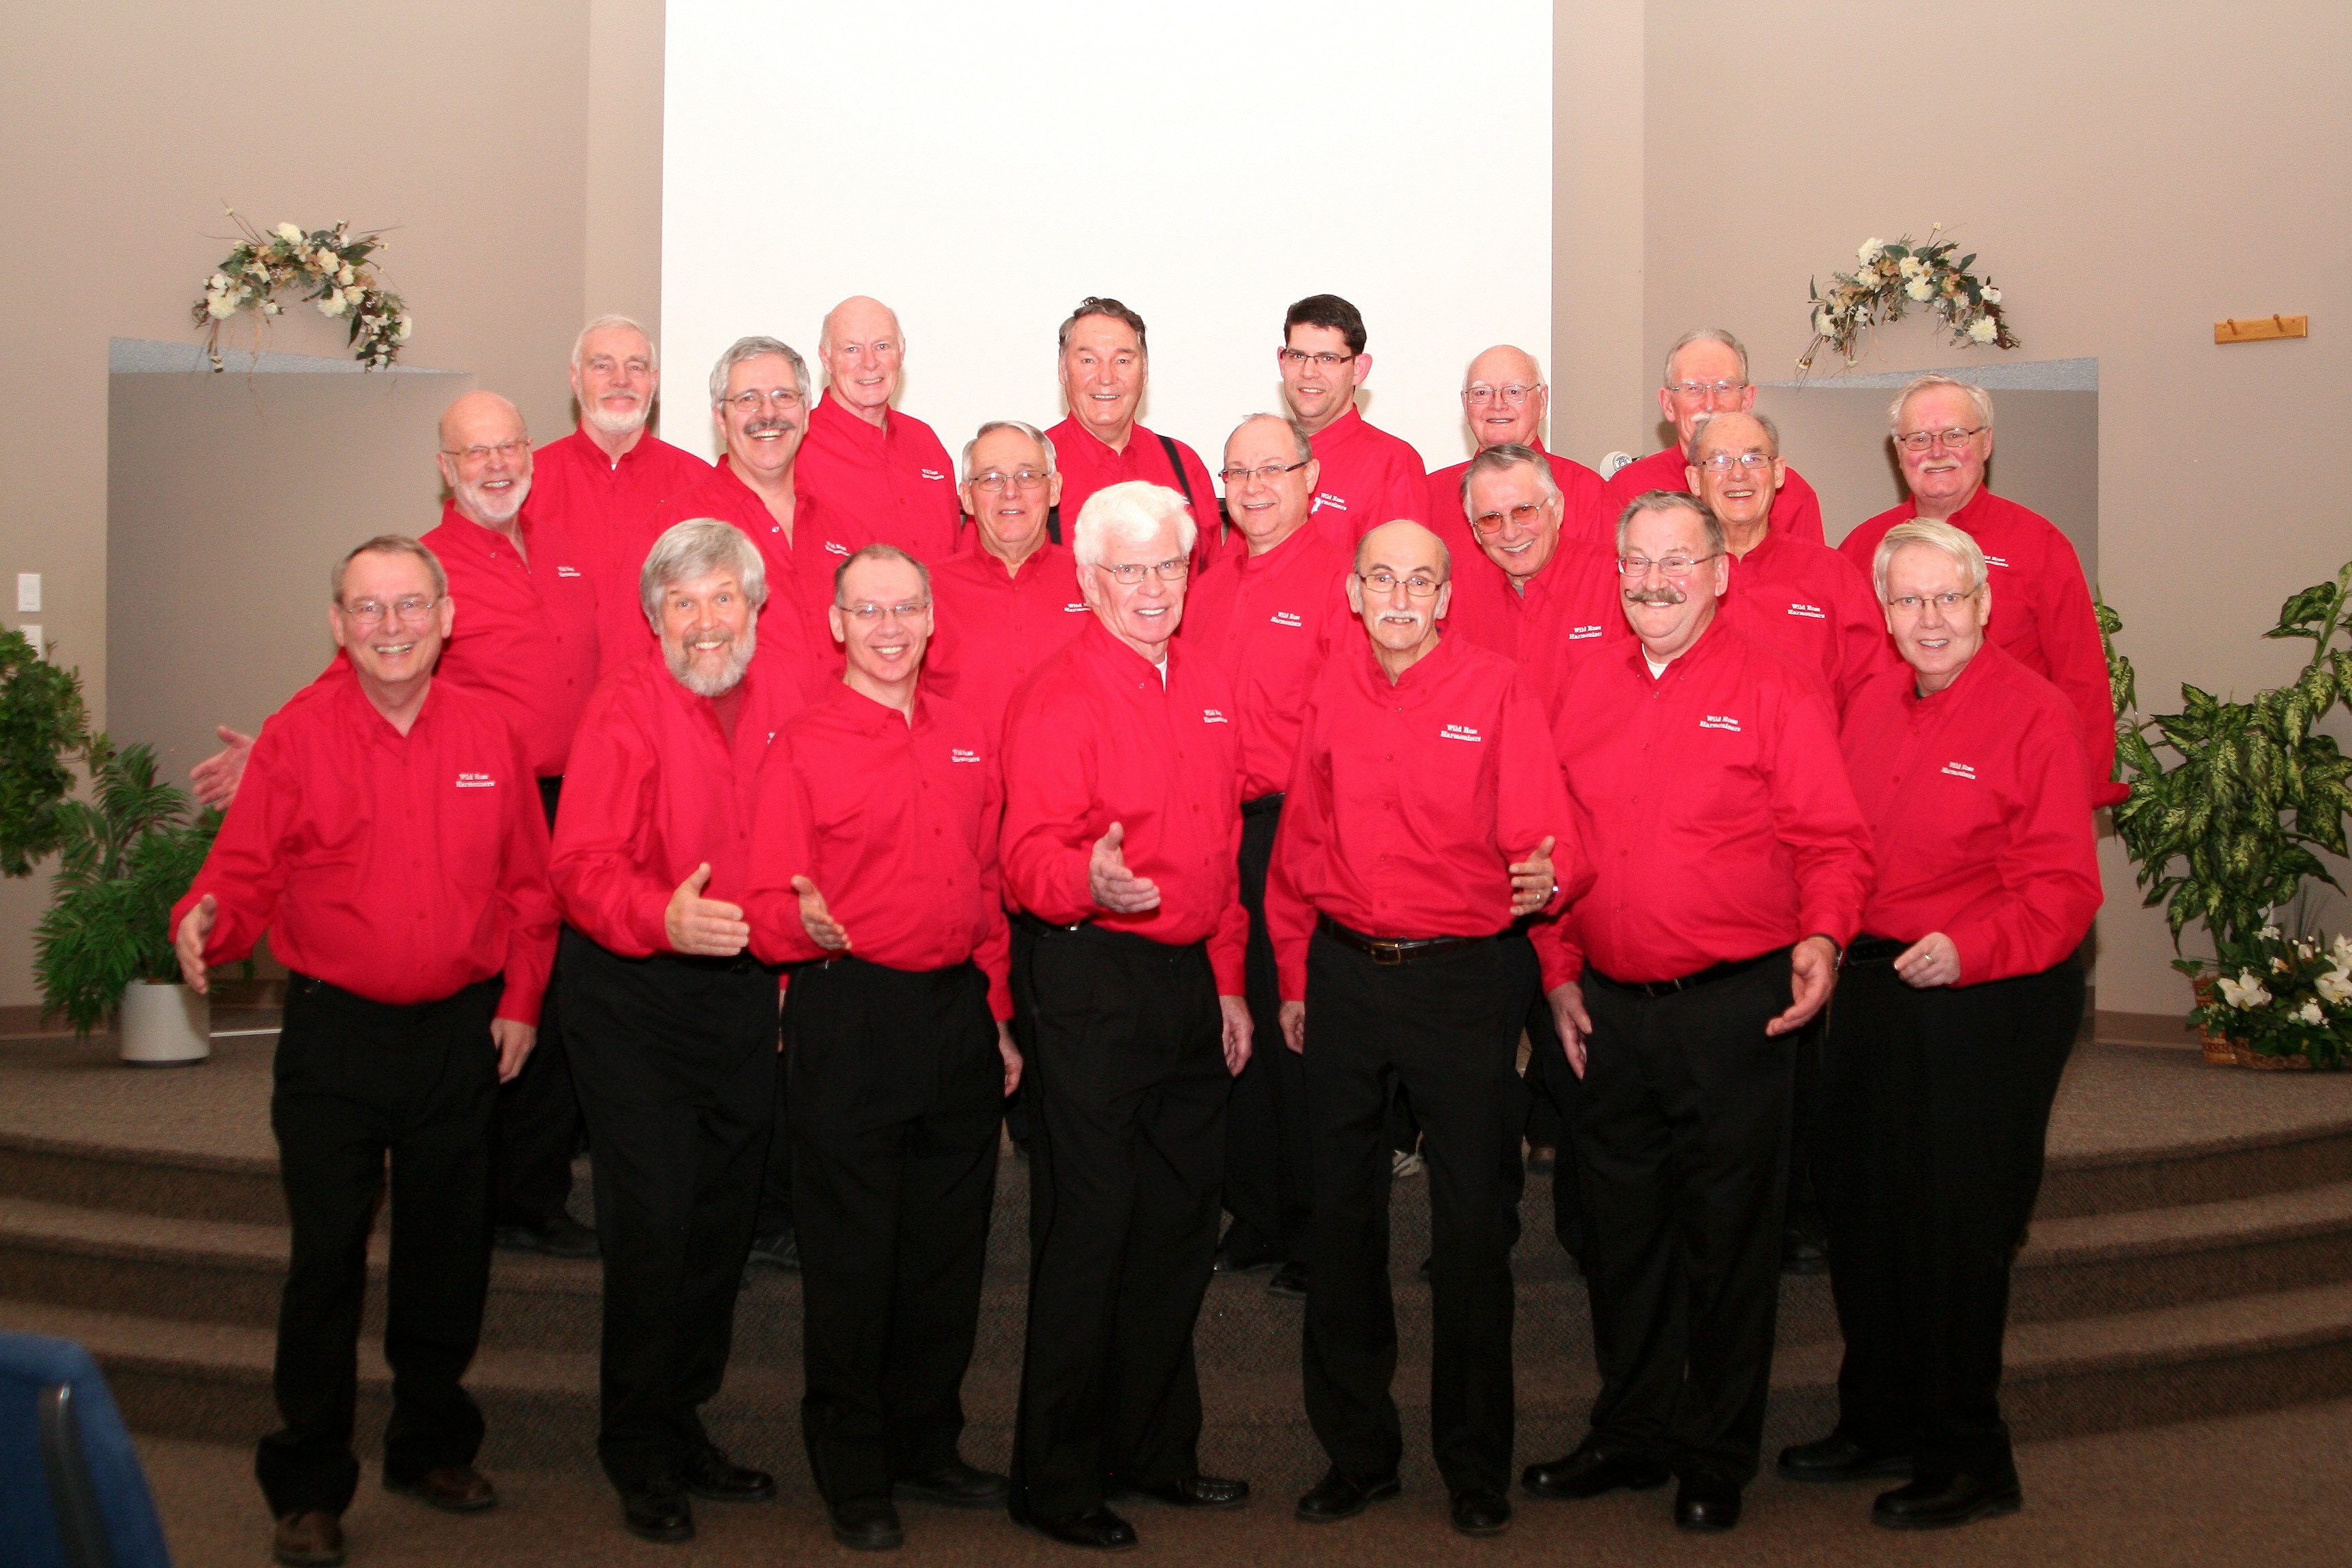 SWEET SOUNDS - The Wild Rose Harmonizers are celebrating Barbershop Harmony Week April 7-13. They're also hosting some special events in April